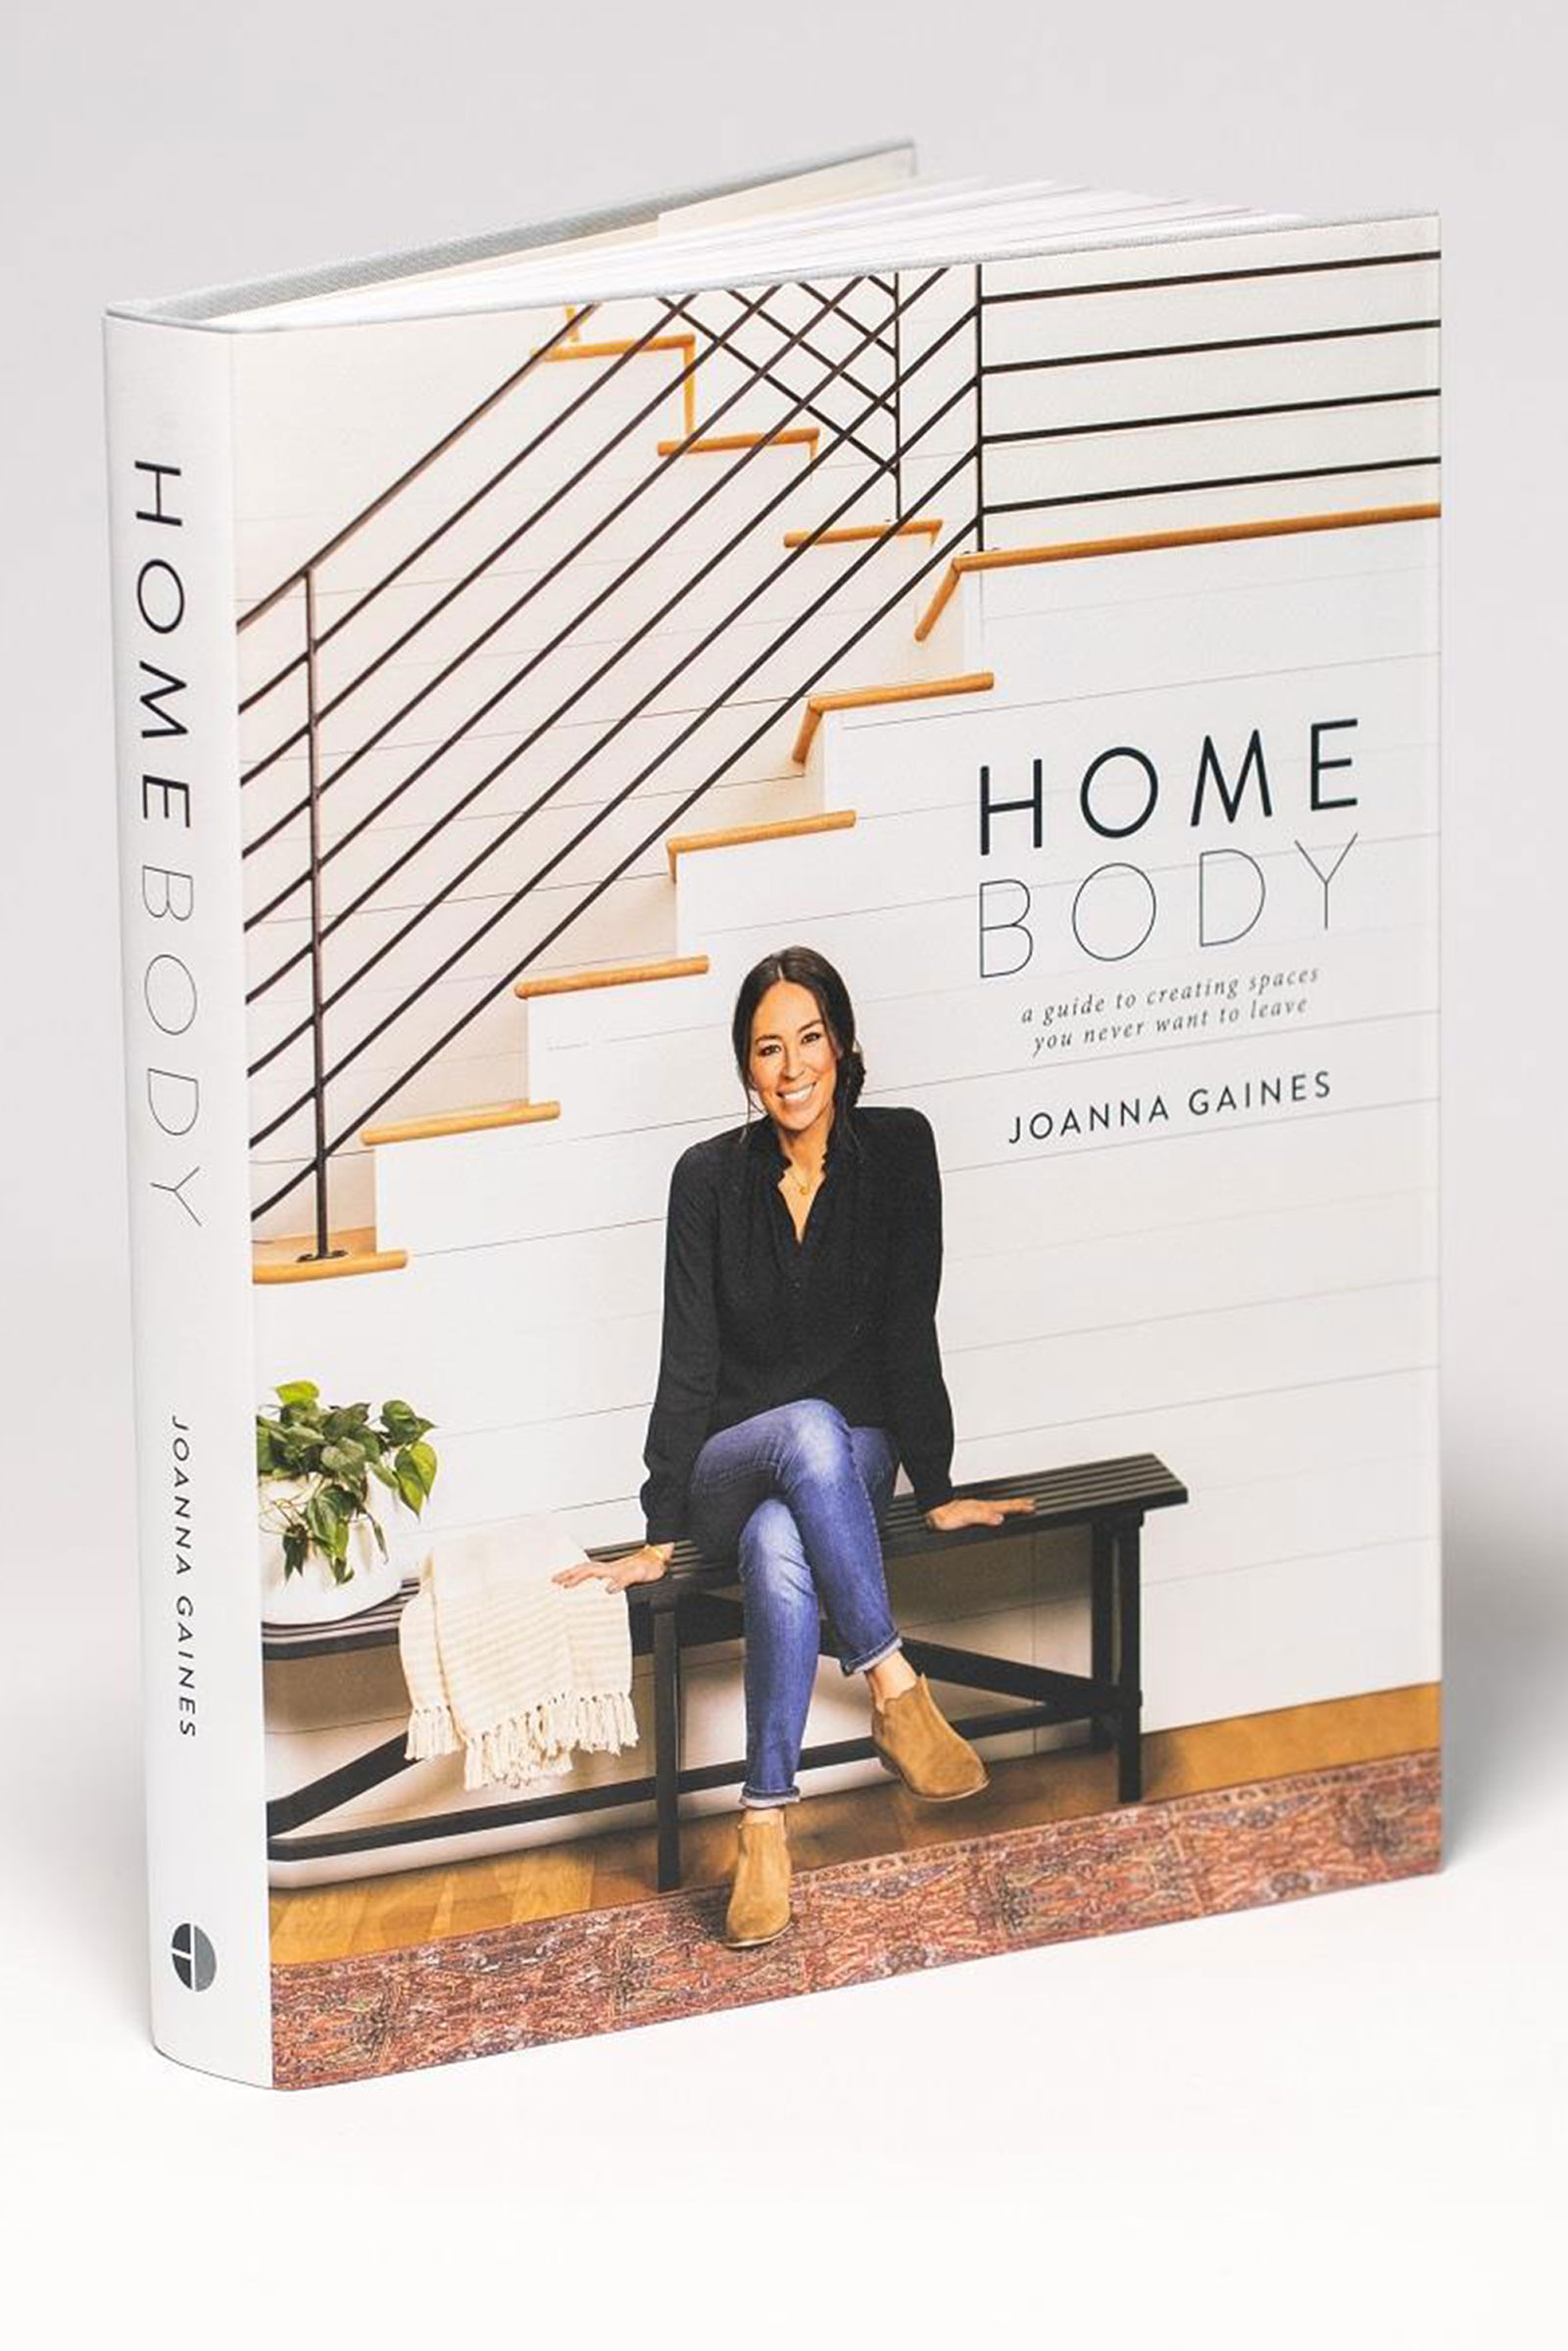 Homebody: A Guide to Creating Spaces You Never Want to Leave Hardcover Book  by Joanna Gaines